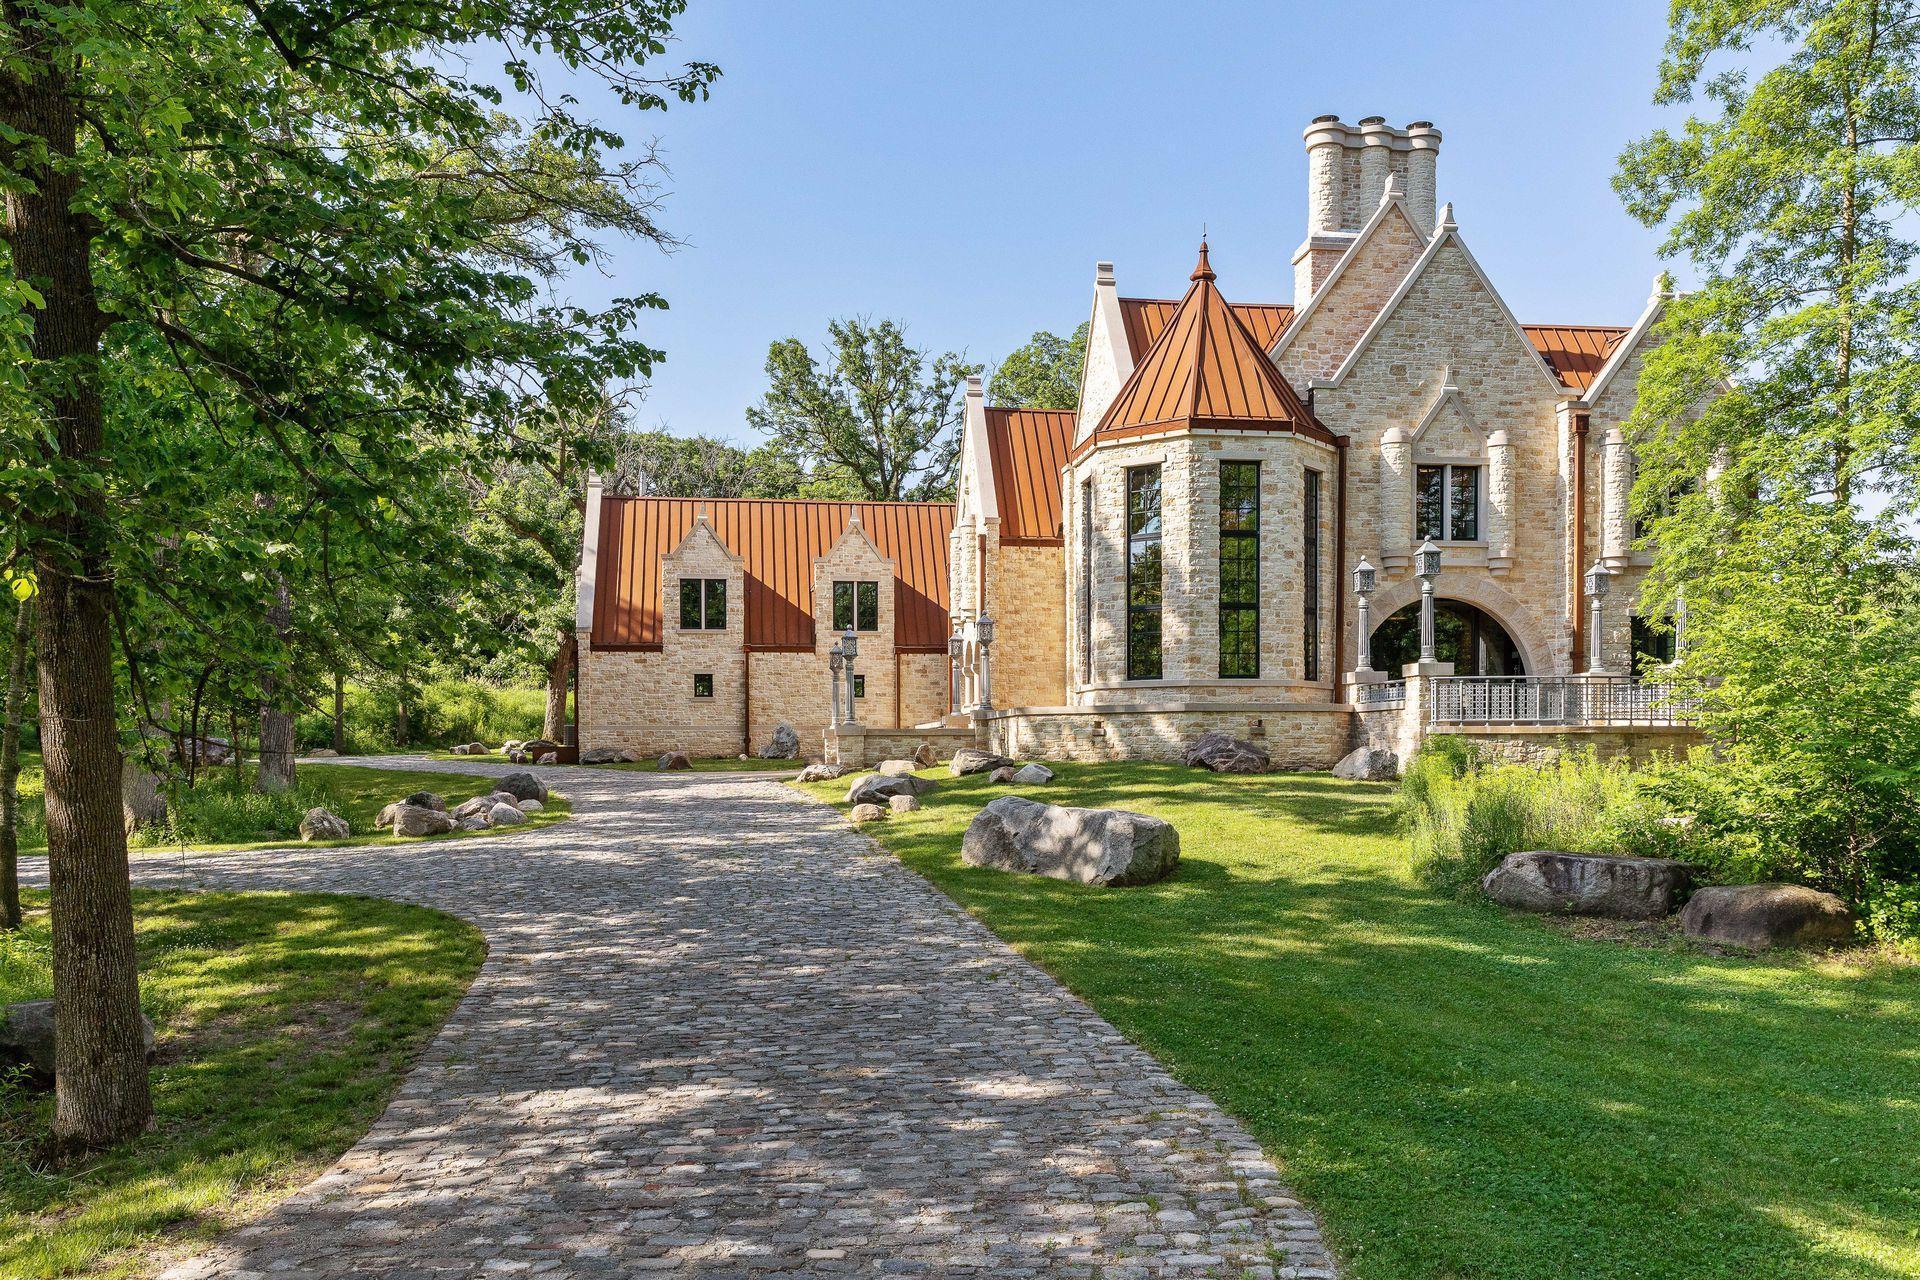 Situated on 3.37 acres in the coveted Orono countryside, Huntington Manor is a prestigious estate proudly designed by architect James McNeal and crafted by masonry artist Luke Busker, Masonry Builders, LLC.